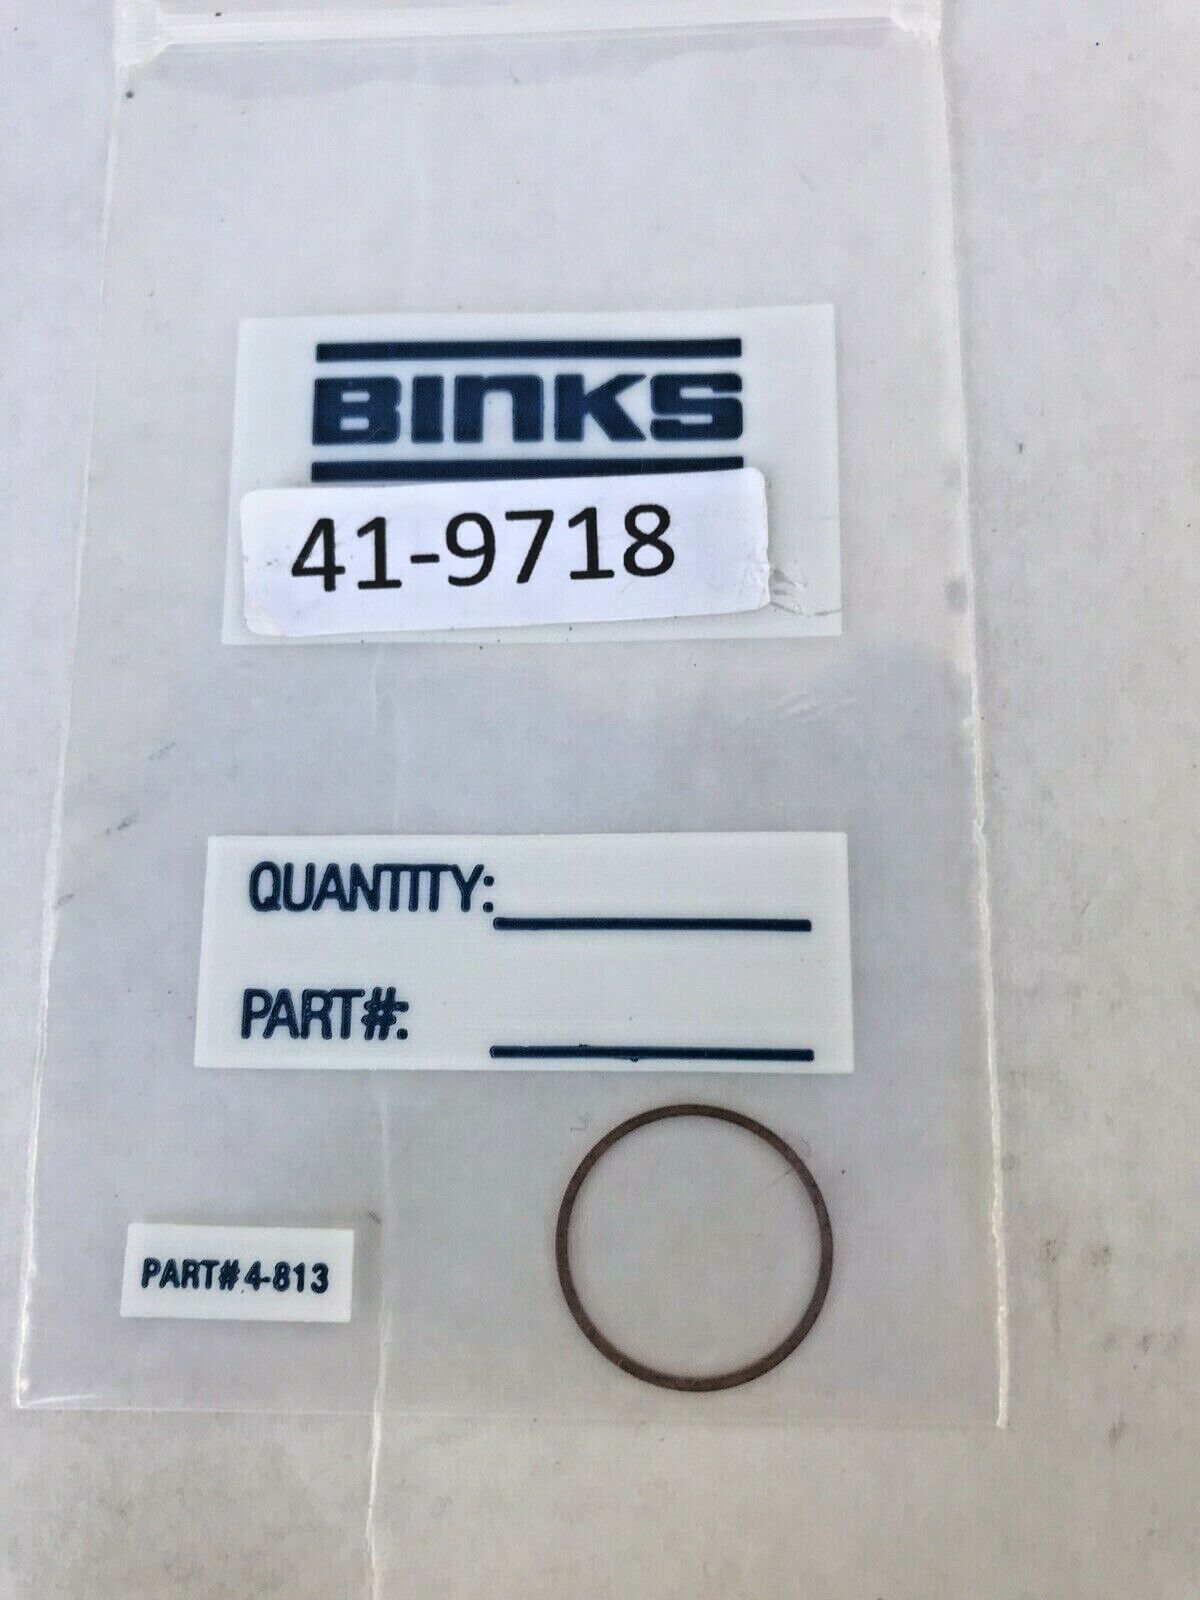 ONE LOT OF 7 BINKS SKU'S = RETAINERS / GLANDS / RETAINERS AND GASKETS - 20 ITEMS Binks 41-10075 / 41-10080 / 41-10083 MORE - фотография #3